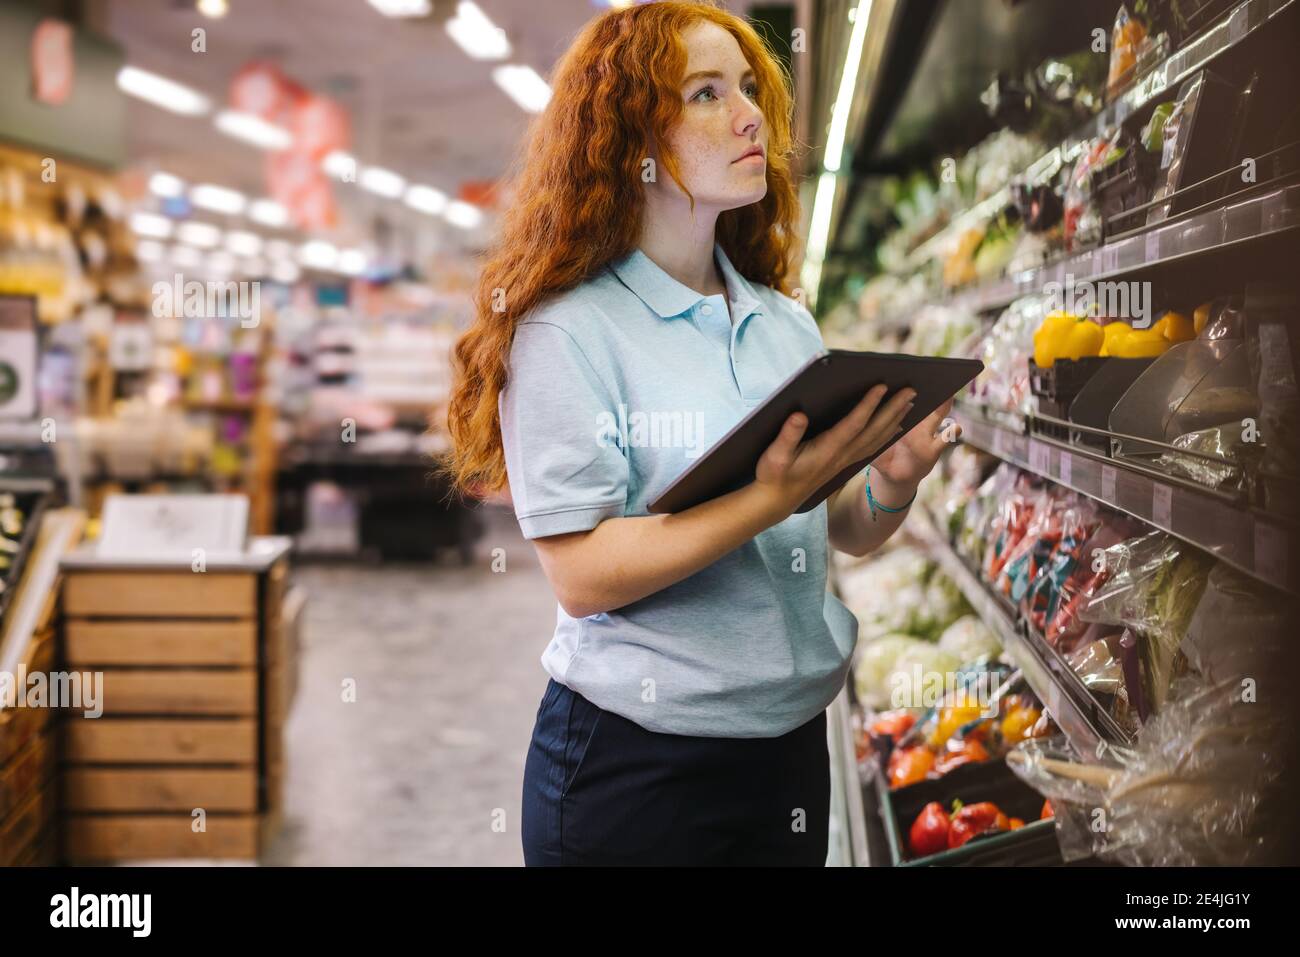 Woman using a digital tablet while doing inventory check in a grocery store. Female trainee employee working in supermarket. Stock Photo